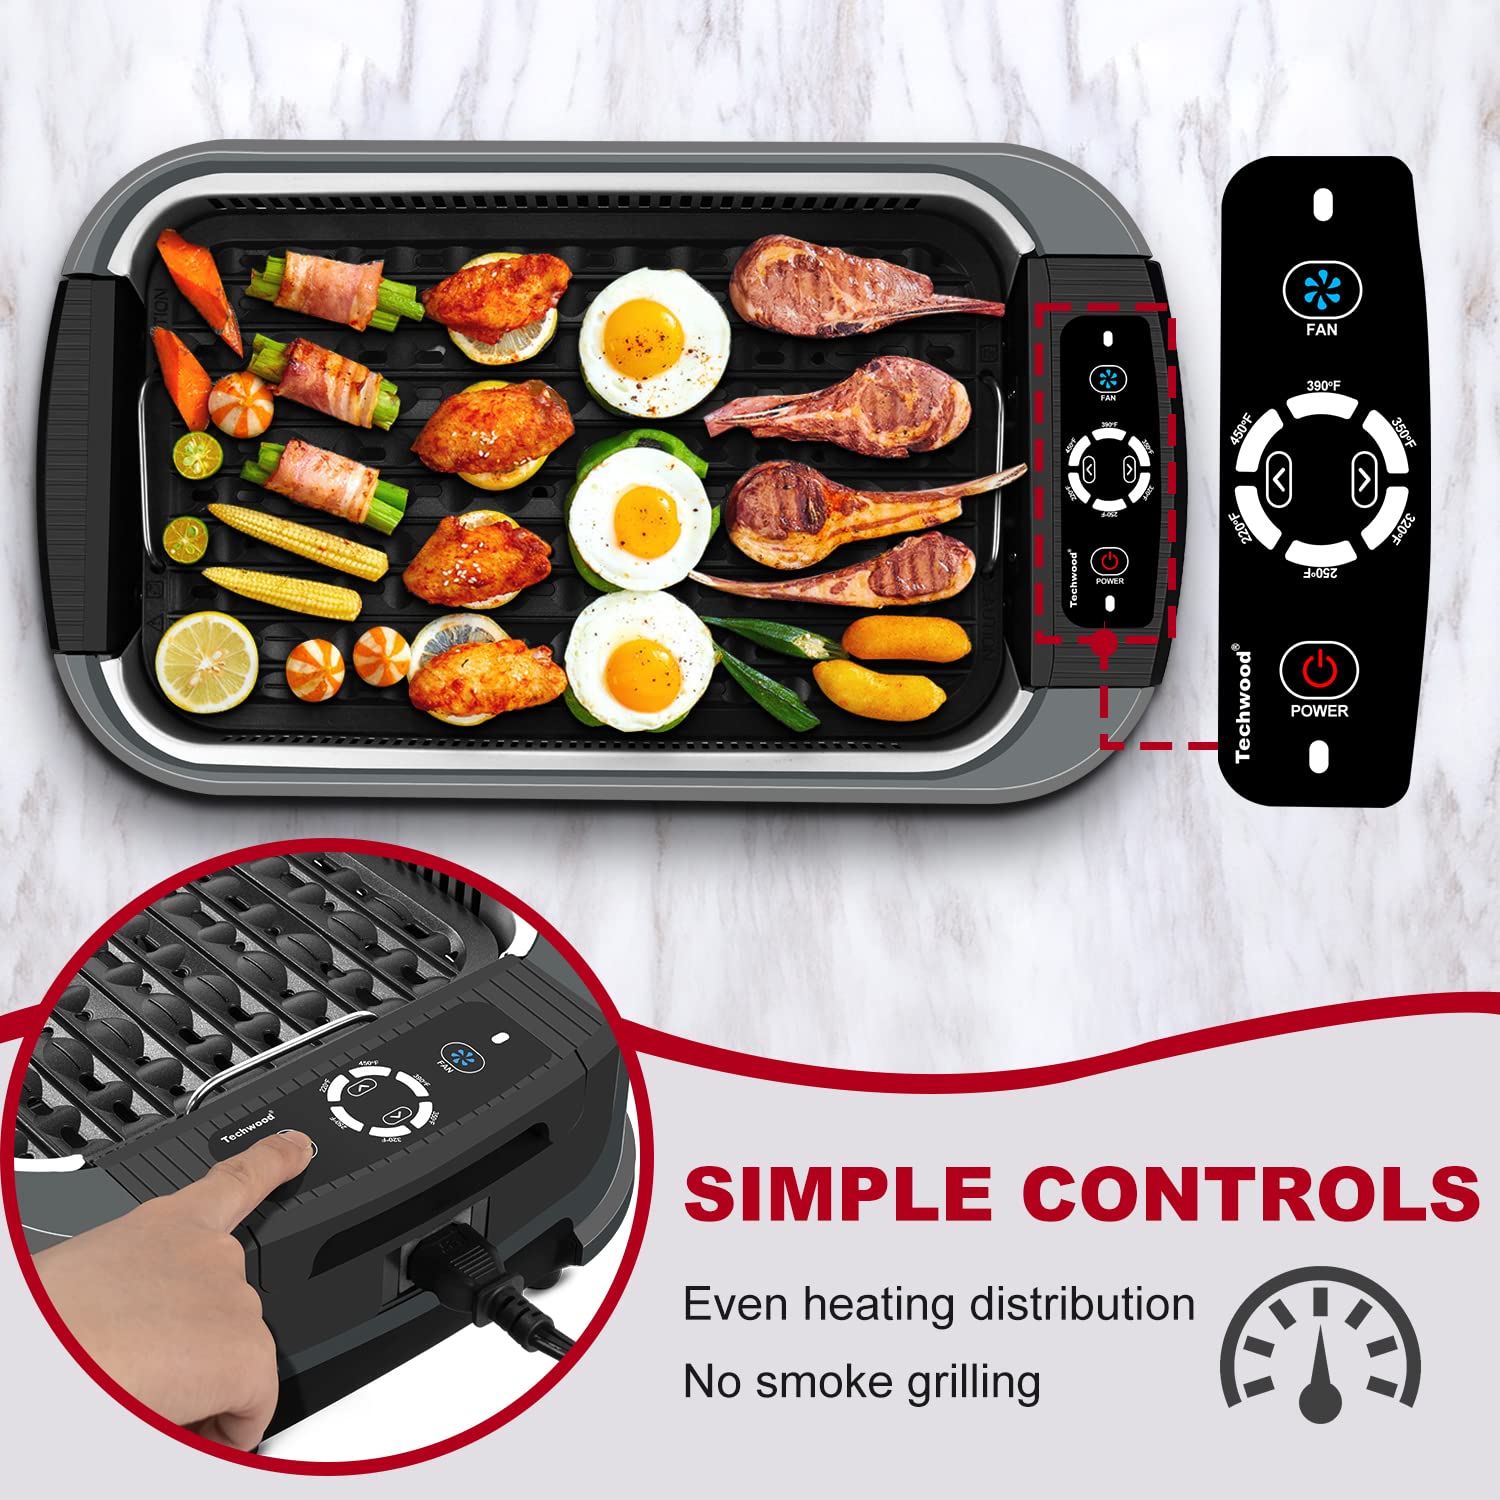 Techwood Indoor Grill Smokeless Grill, 1500W Indoor Korean BBQ Electric Tabletop Grill with Tempered Glass Lid, Removable Grill and Griddle Plates with Drip Tray